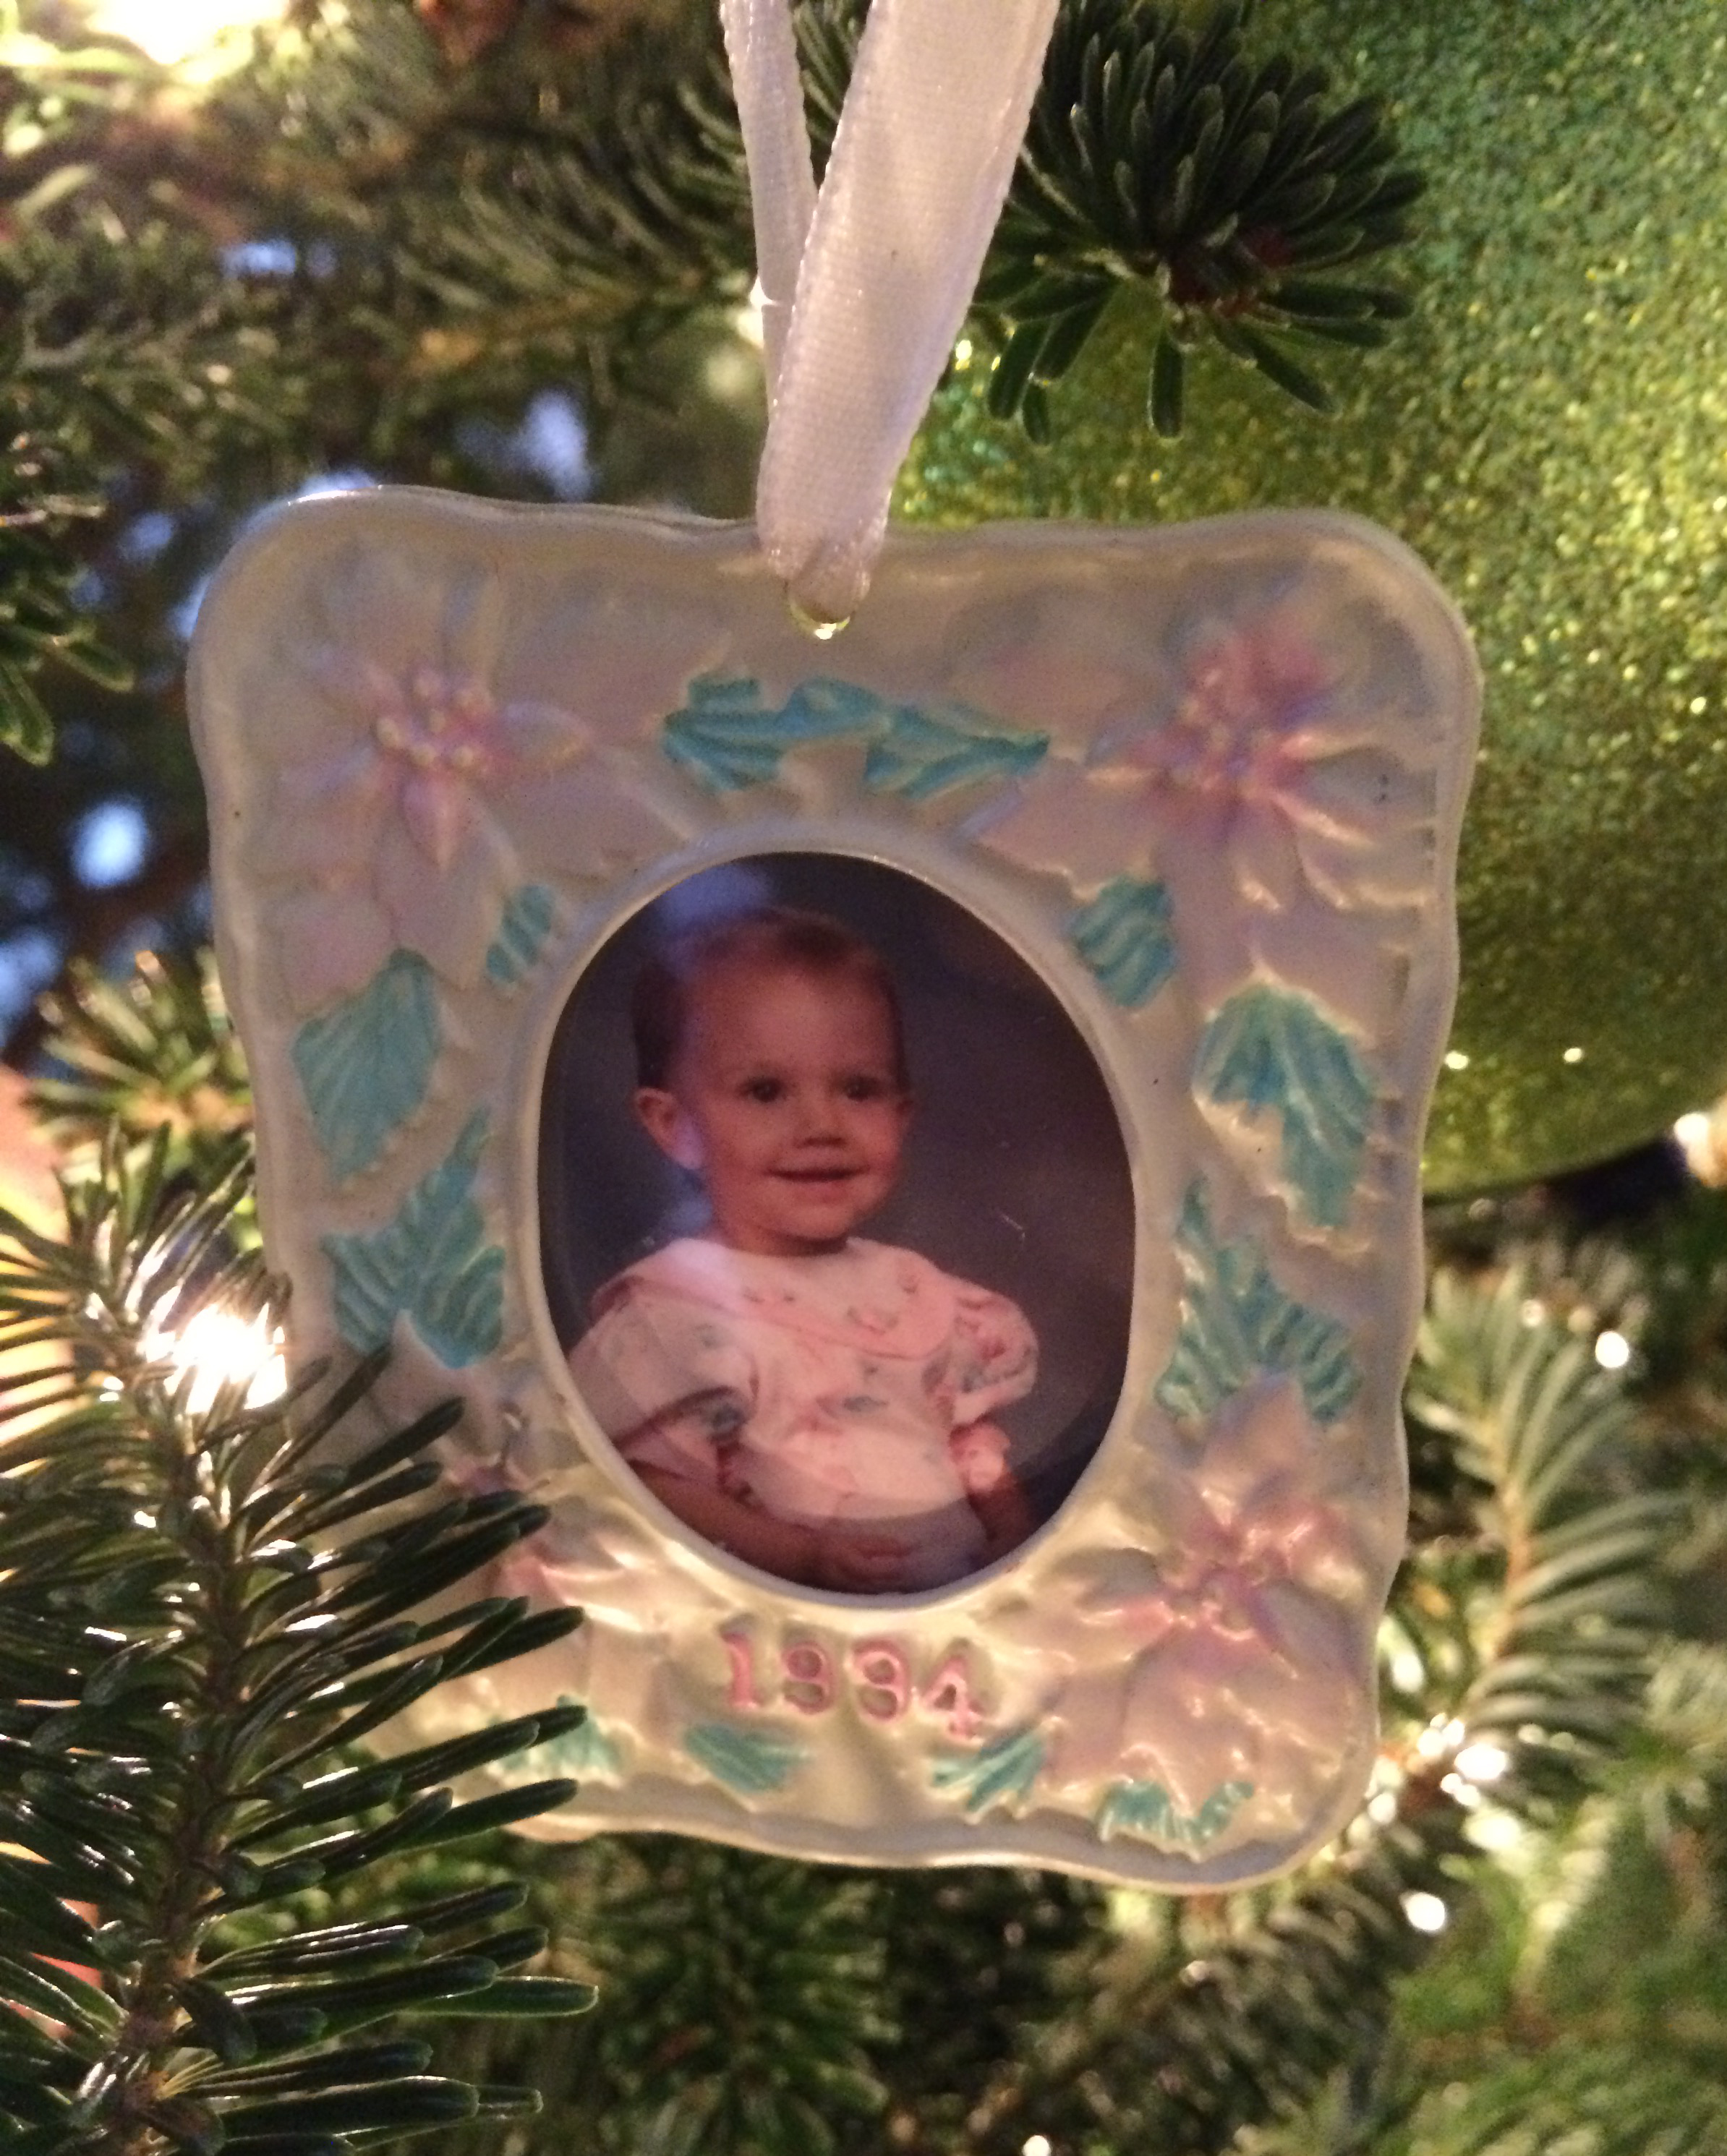 I love looking at this ornament that depicts a young Sid.